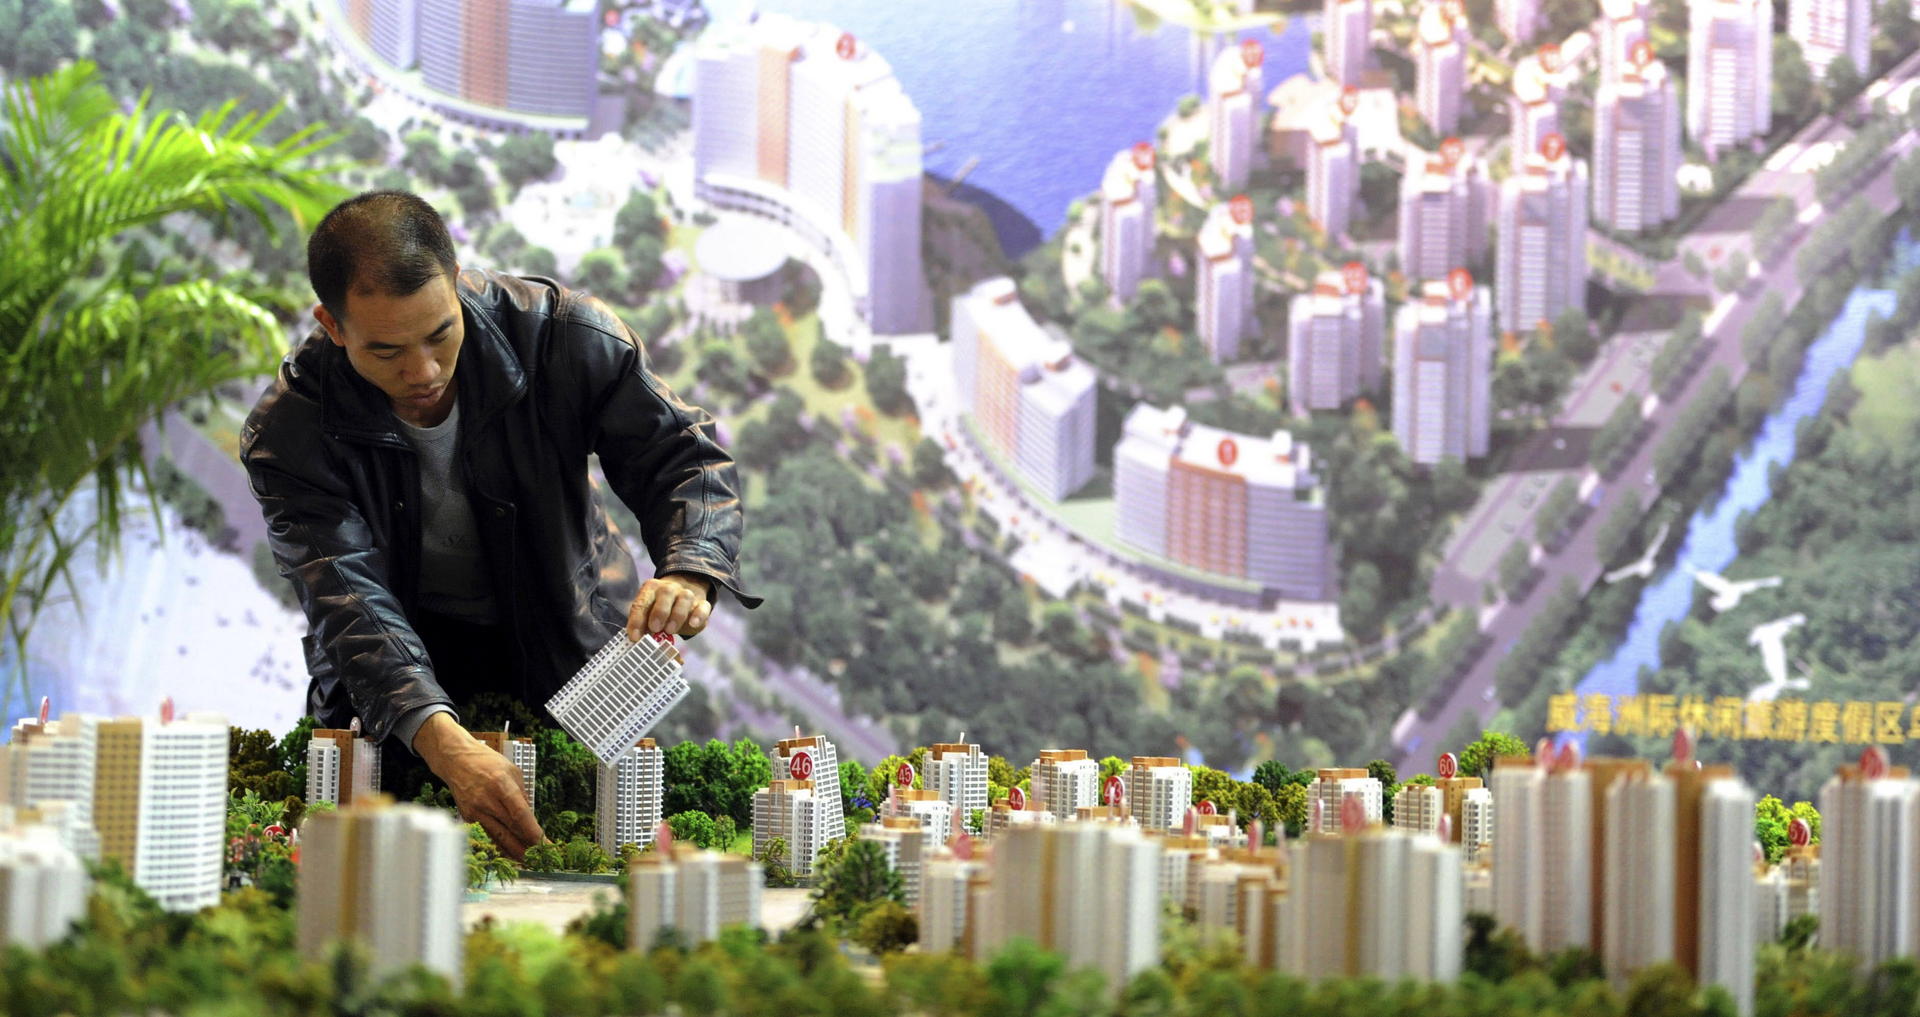 Home prices in Nanjing declined over the summer, ending a 24-month streak when prices rose in the city, while sales have fallen substantially as well. Photo: AP